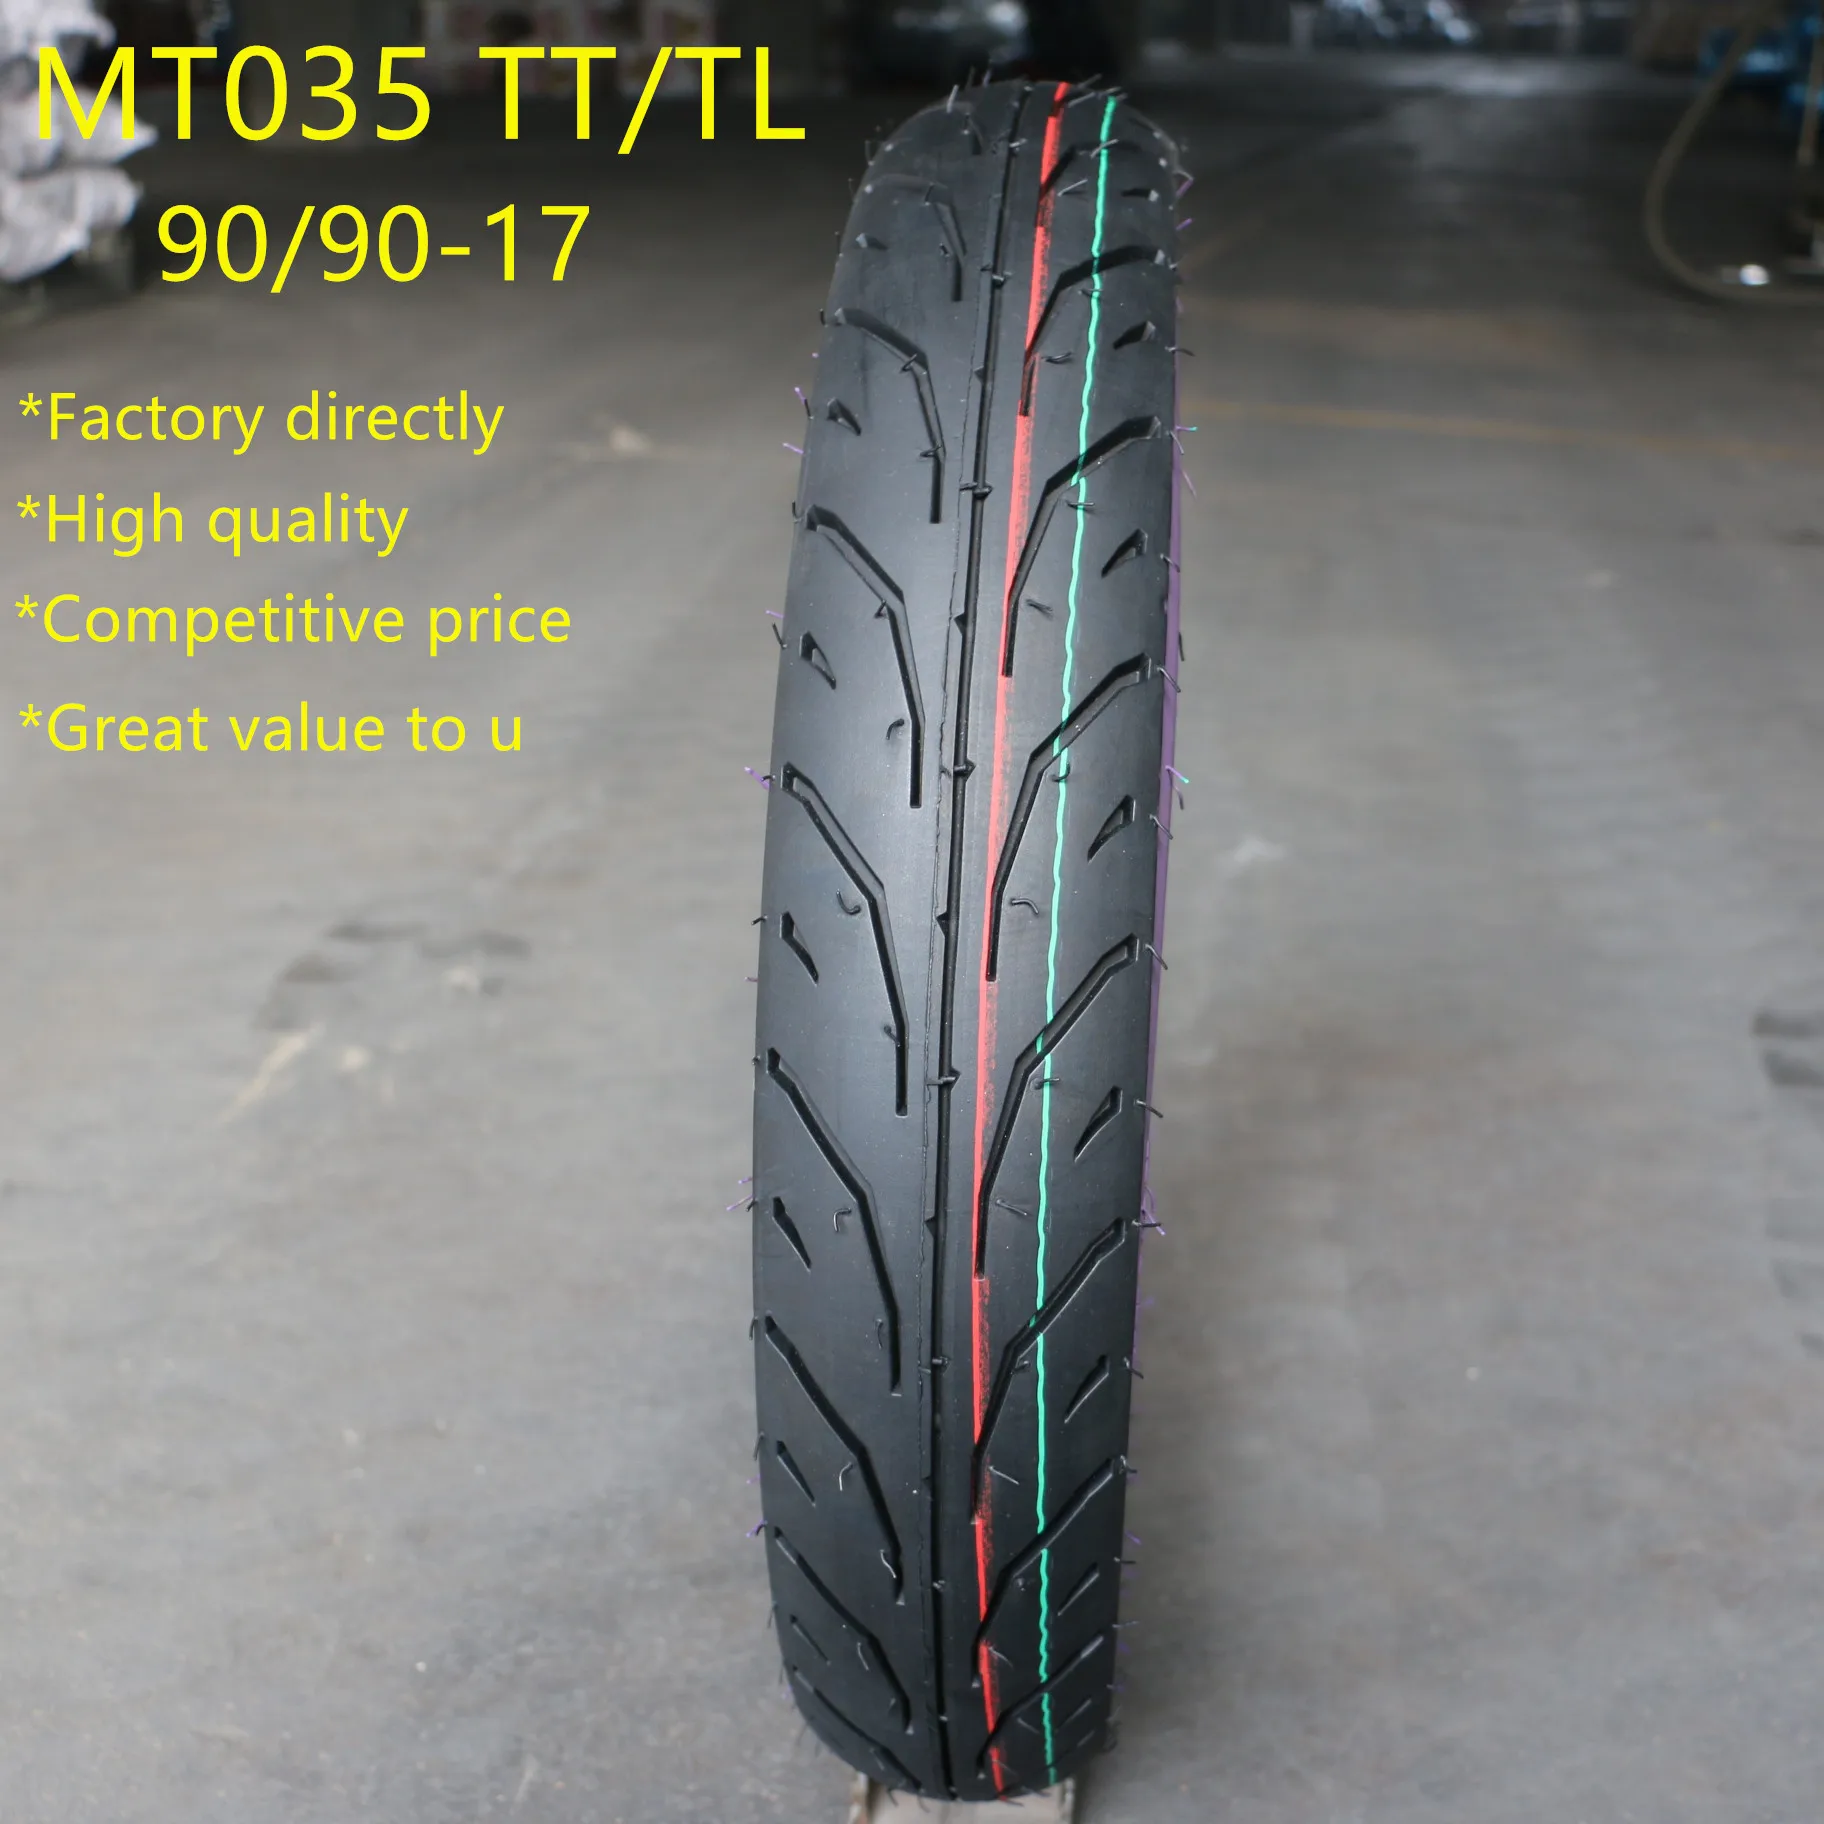 High Quality Simba Tyre 90 90 17 Motorcycle Tire Tubeless Buy 90 90 17 Motorcycle Tire Tubeless 90 90 17 Tyre Tubeless 90 90 17 Tire Tubeless Product On Alibaba Com